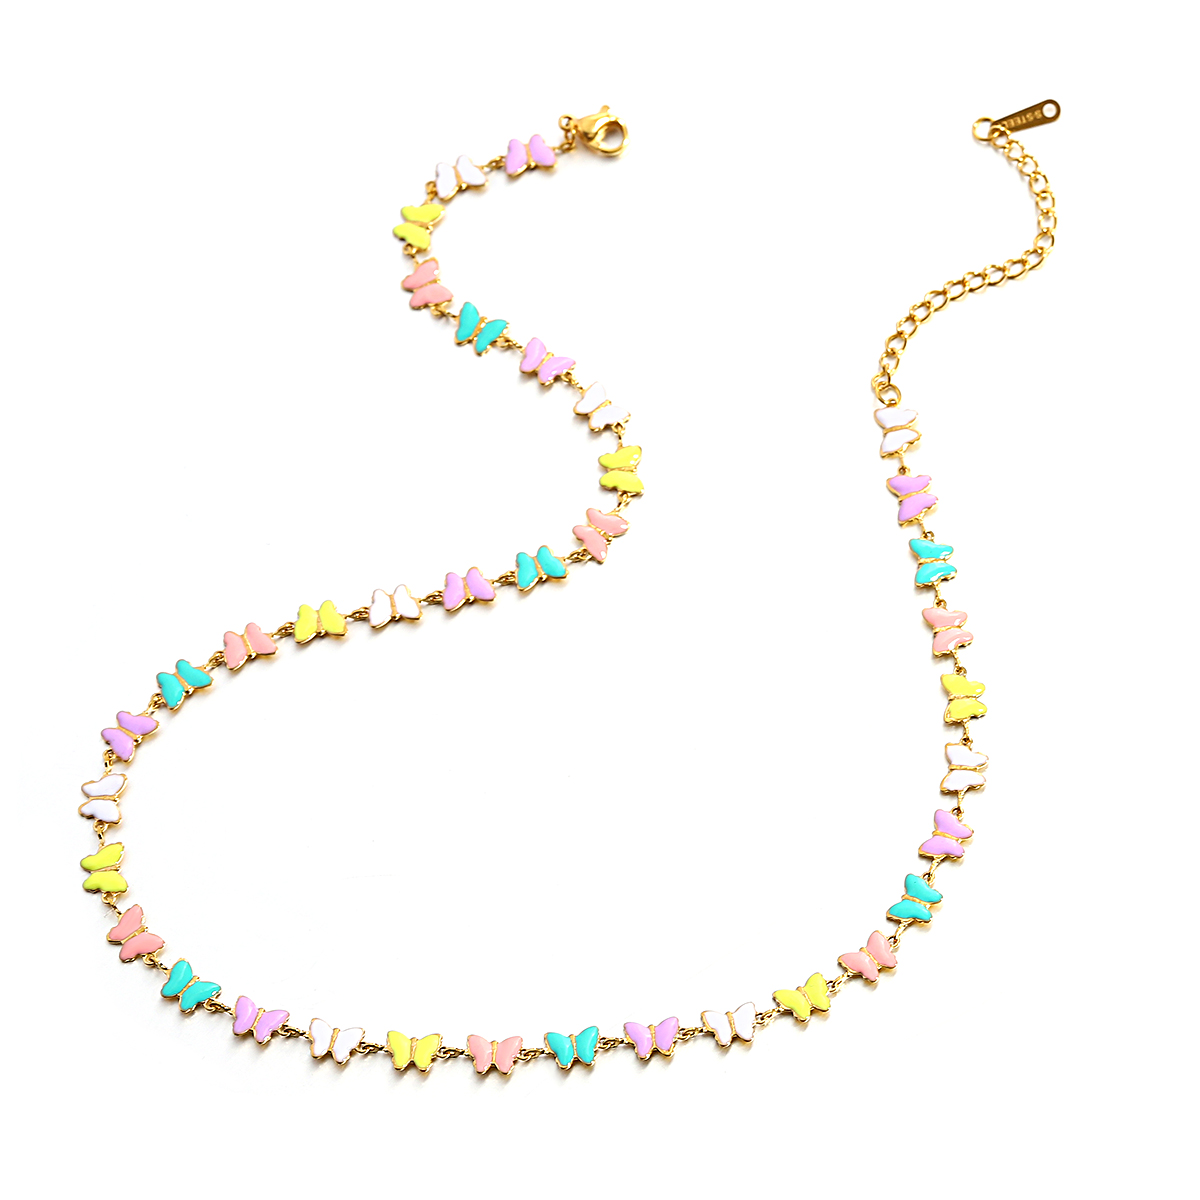 AENSOA Colorful Enamel Butterfly Daisy Flower Choker Necklaces for Women Girls Stainless Steel Gold Color Chain Necklace Jewelry 6